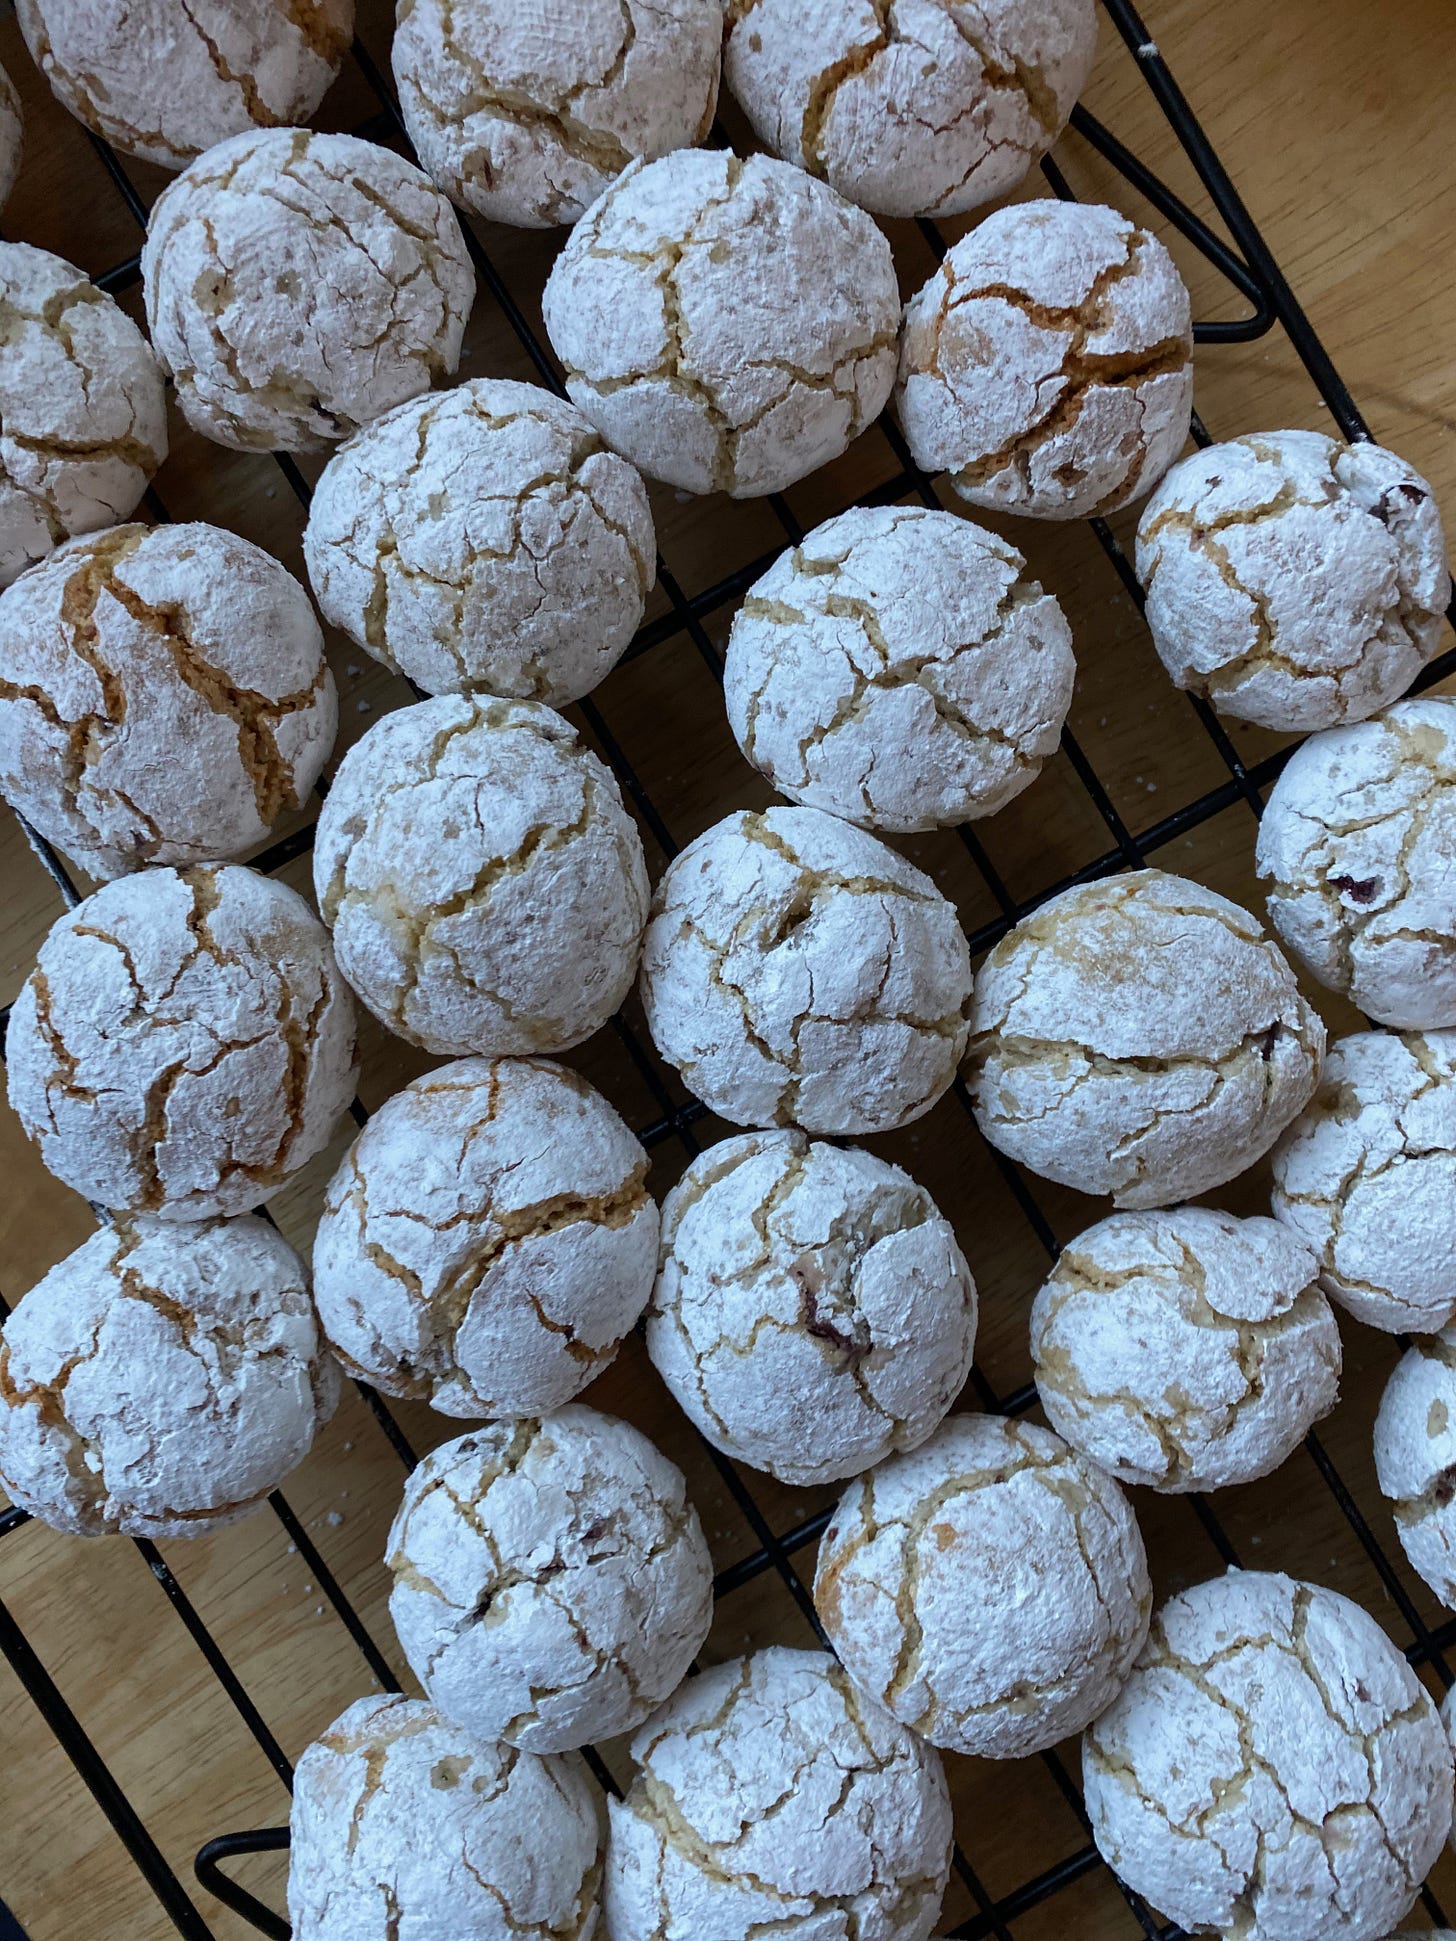 Closeup of many small round cookies, coated in powdered sugar, with uneven cracks all over their tops.